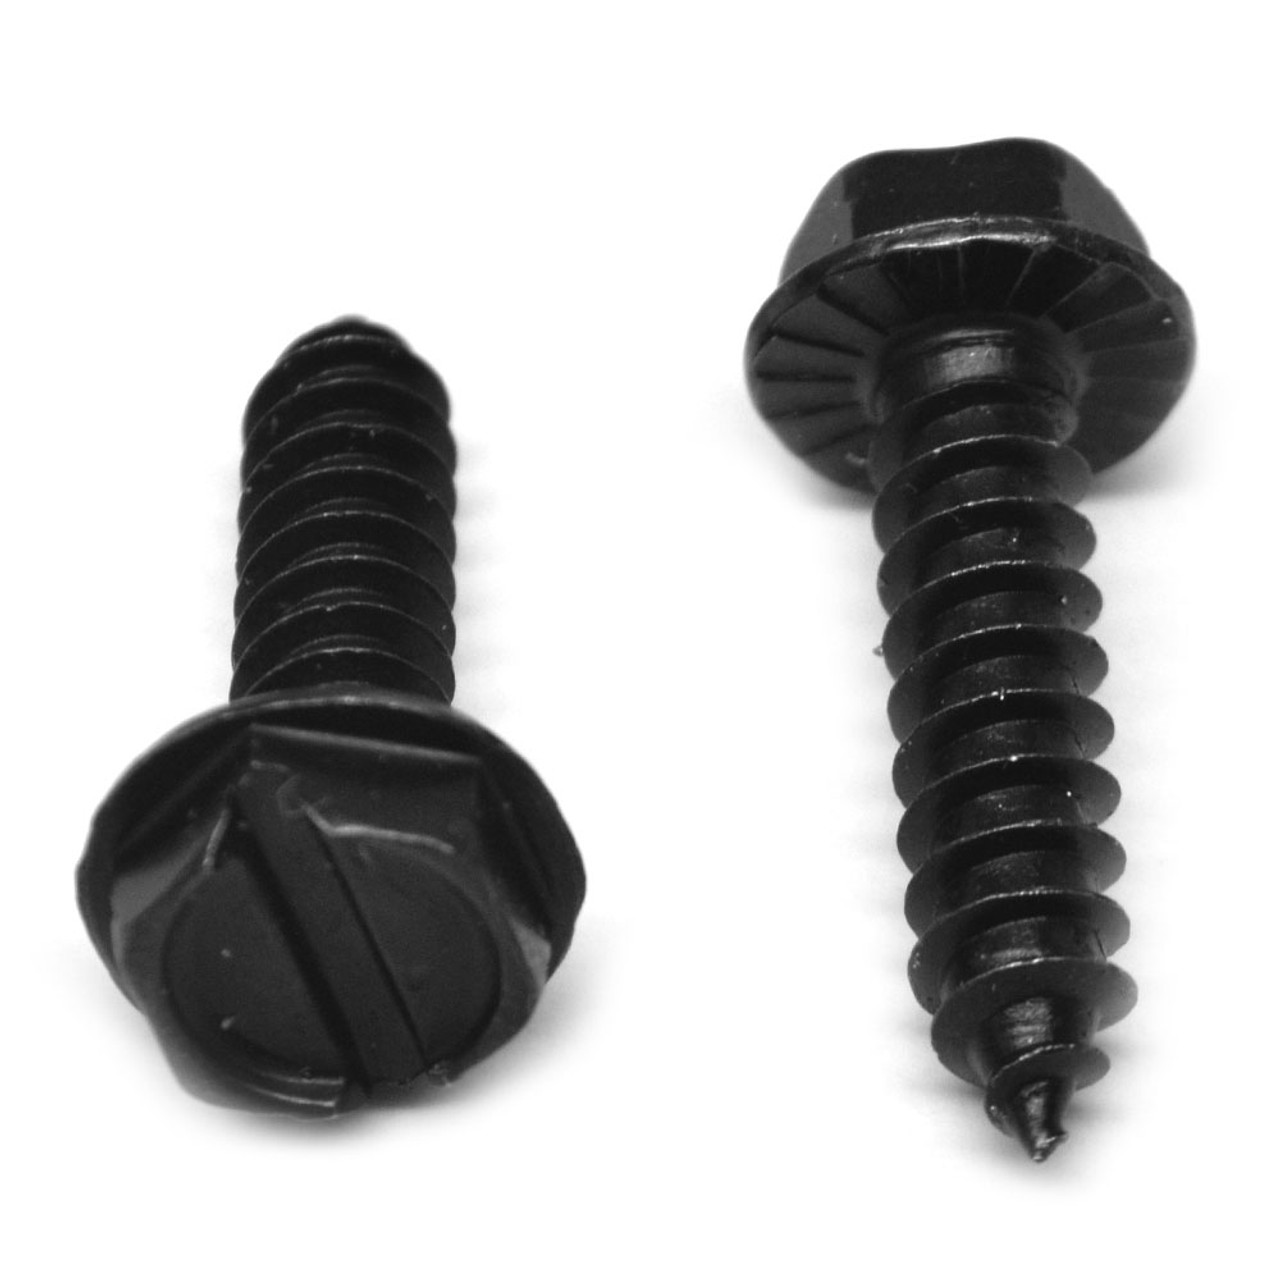 #10-16 x 3/4" (FT) Sheet Metal Screw Slotted Hex Washer Head with Serration Type AB Low Carbon Steel Black Oxide